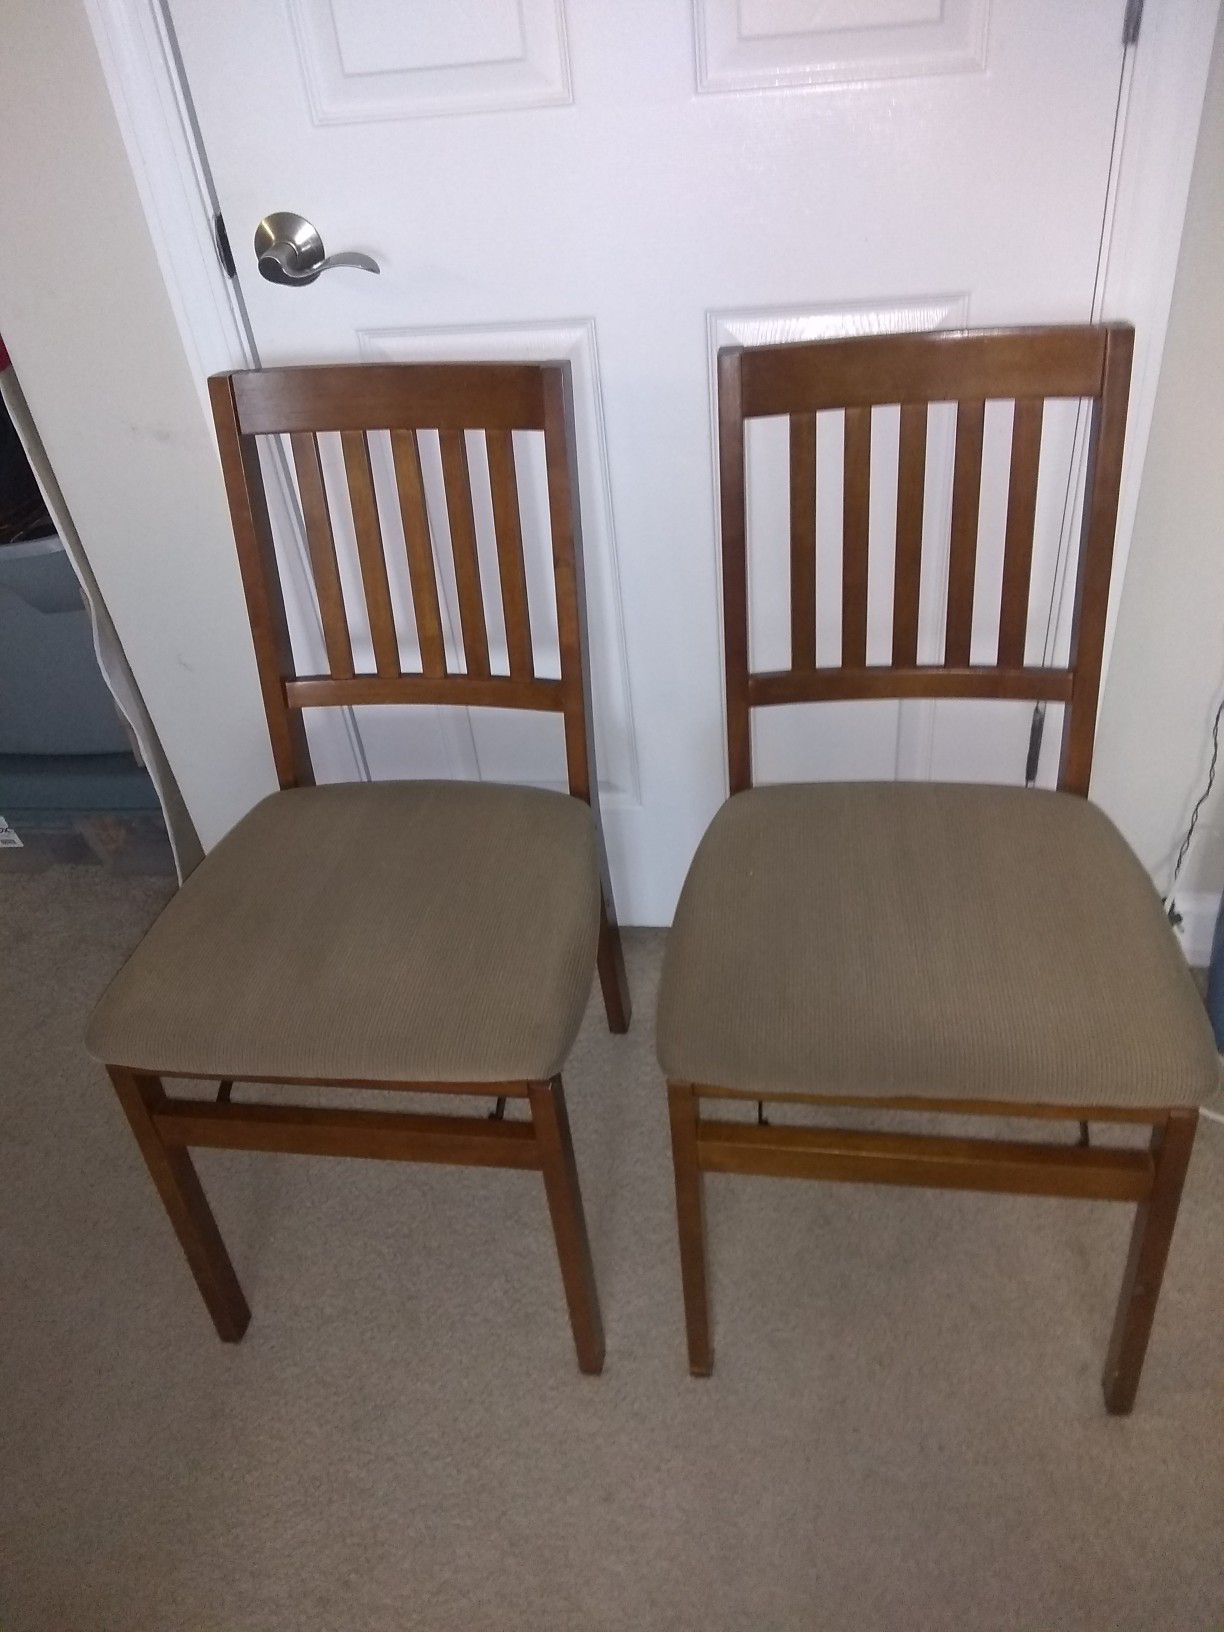 2 folding chairs very good condition